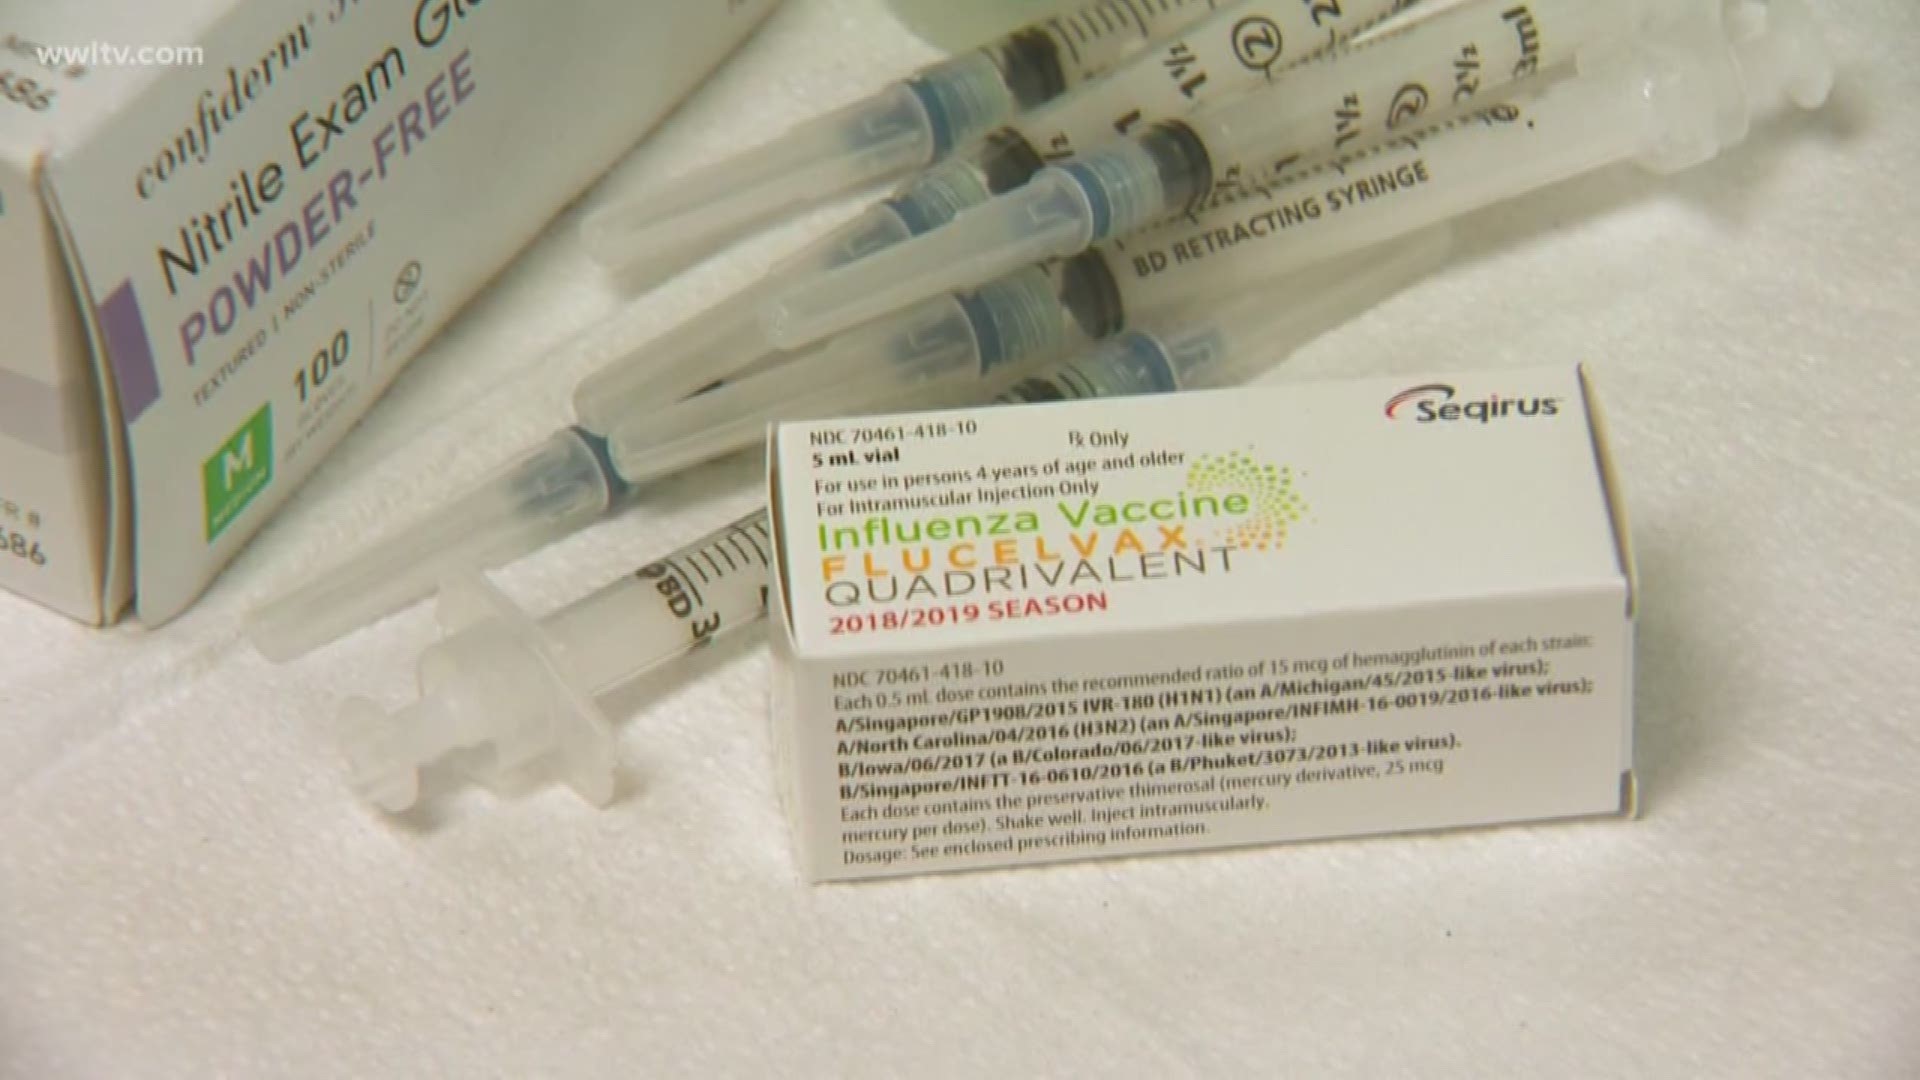 Doctors say they're already seeing earlier cases of the flu this year, including some cases in the Shreveport area as early as August.